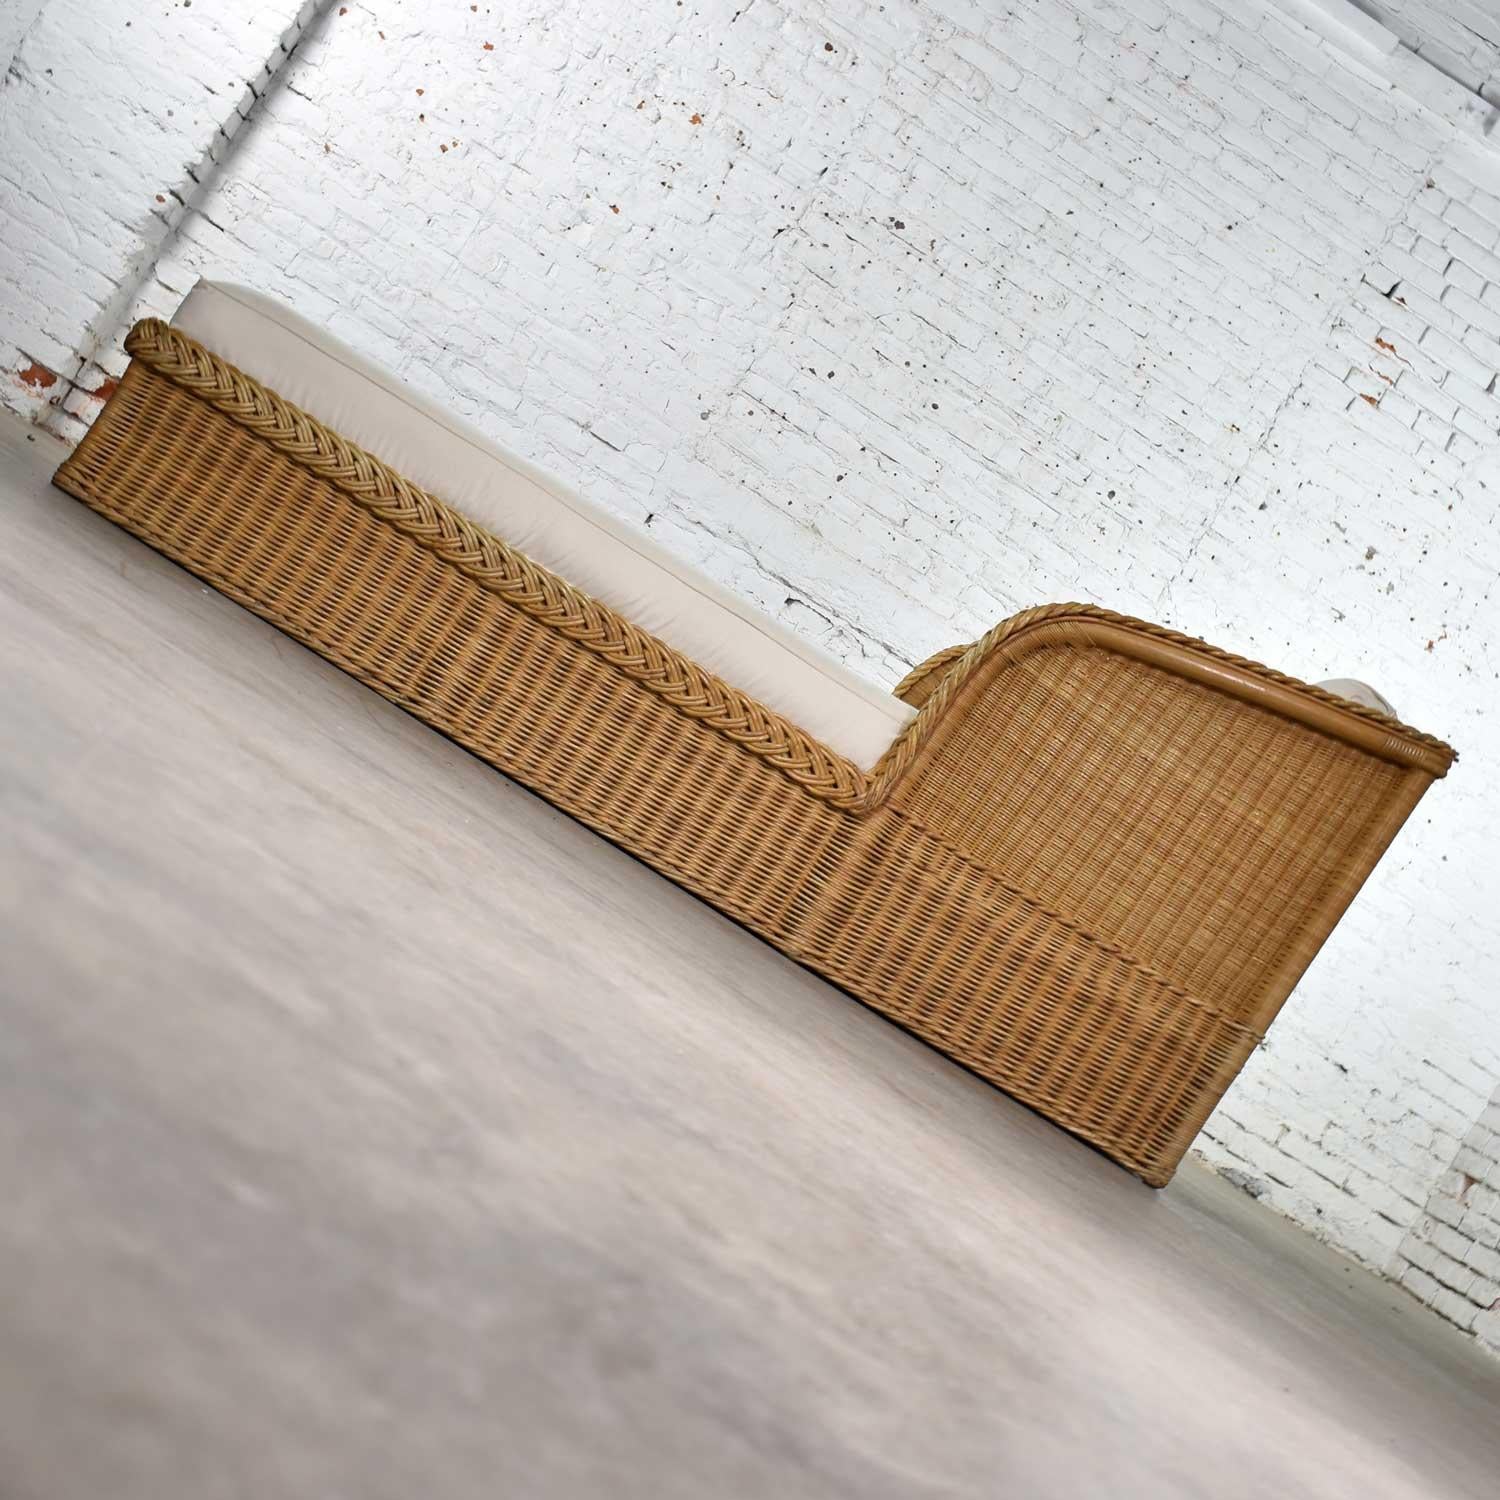 20th Century Wide Rattan Wicker Chaise by Bielecky Brothers, Inc. New White Canvas Upholstery